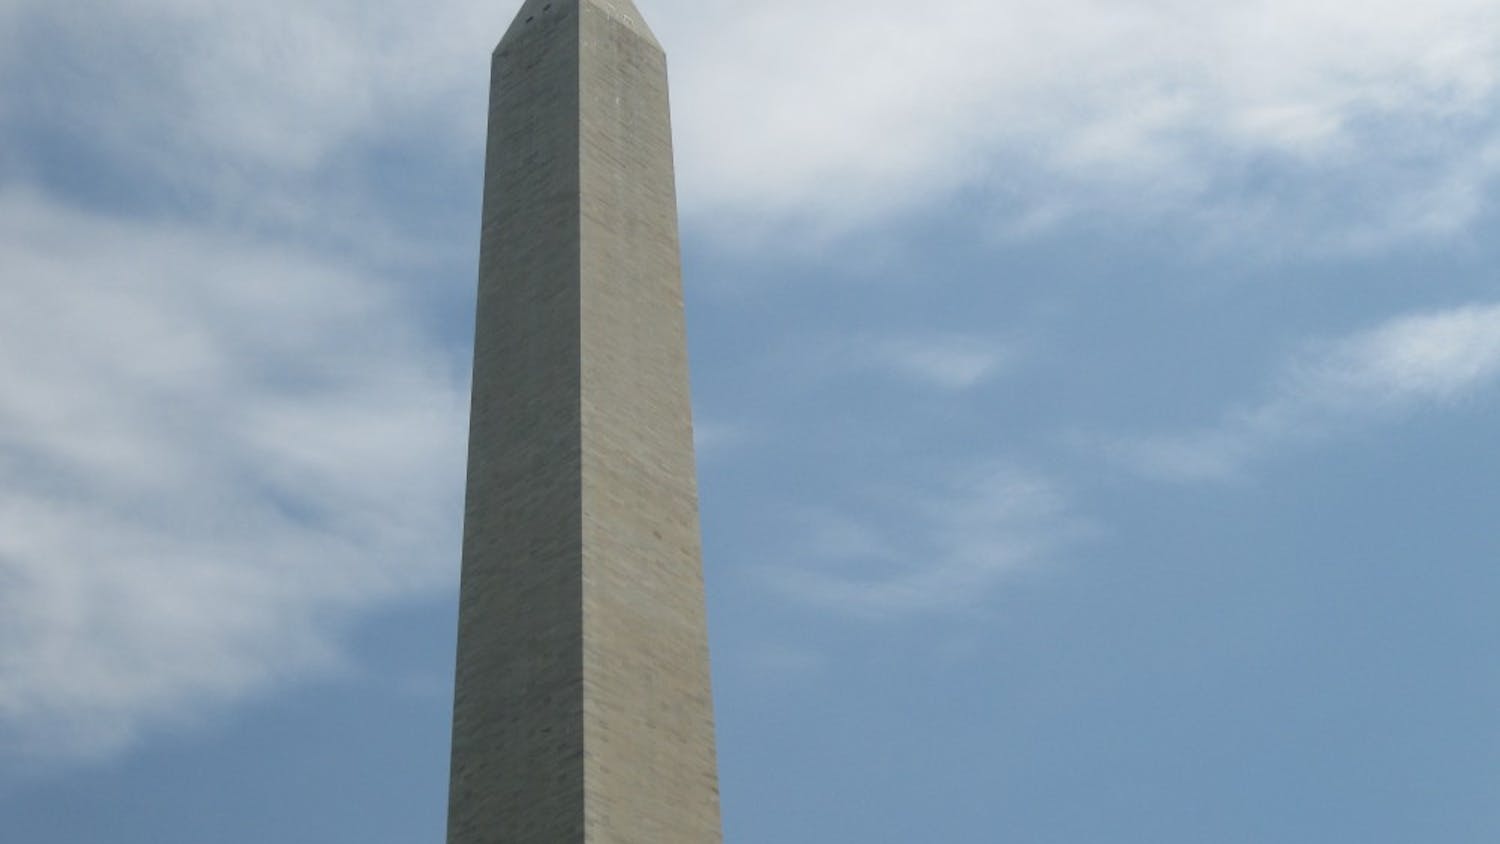 Gallery: Washington Monument reopens after three-year construction